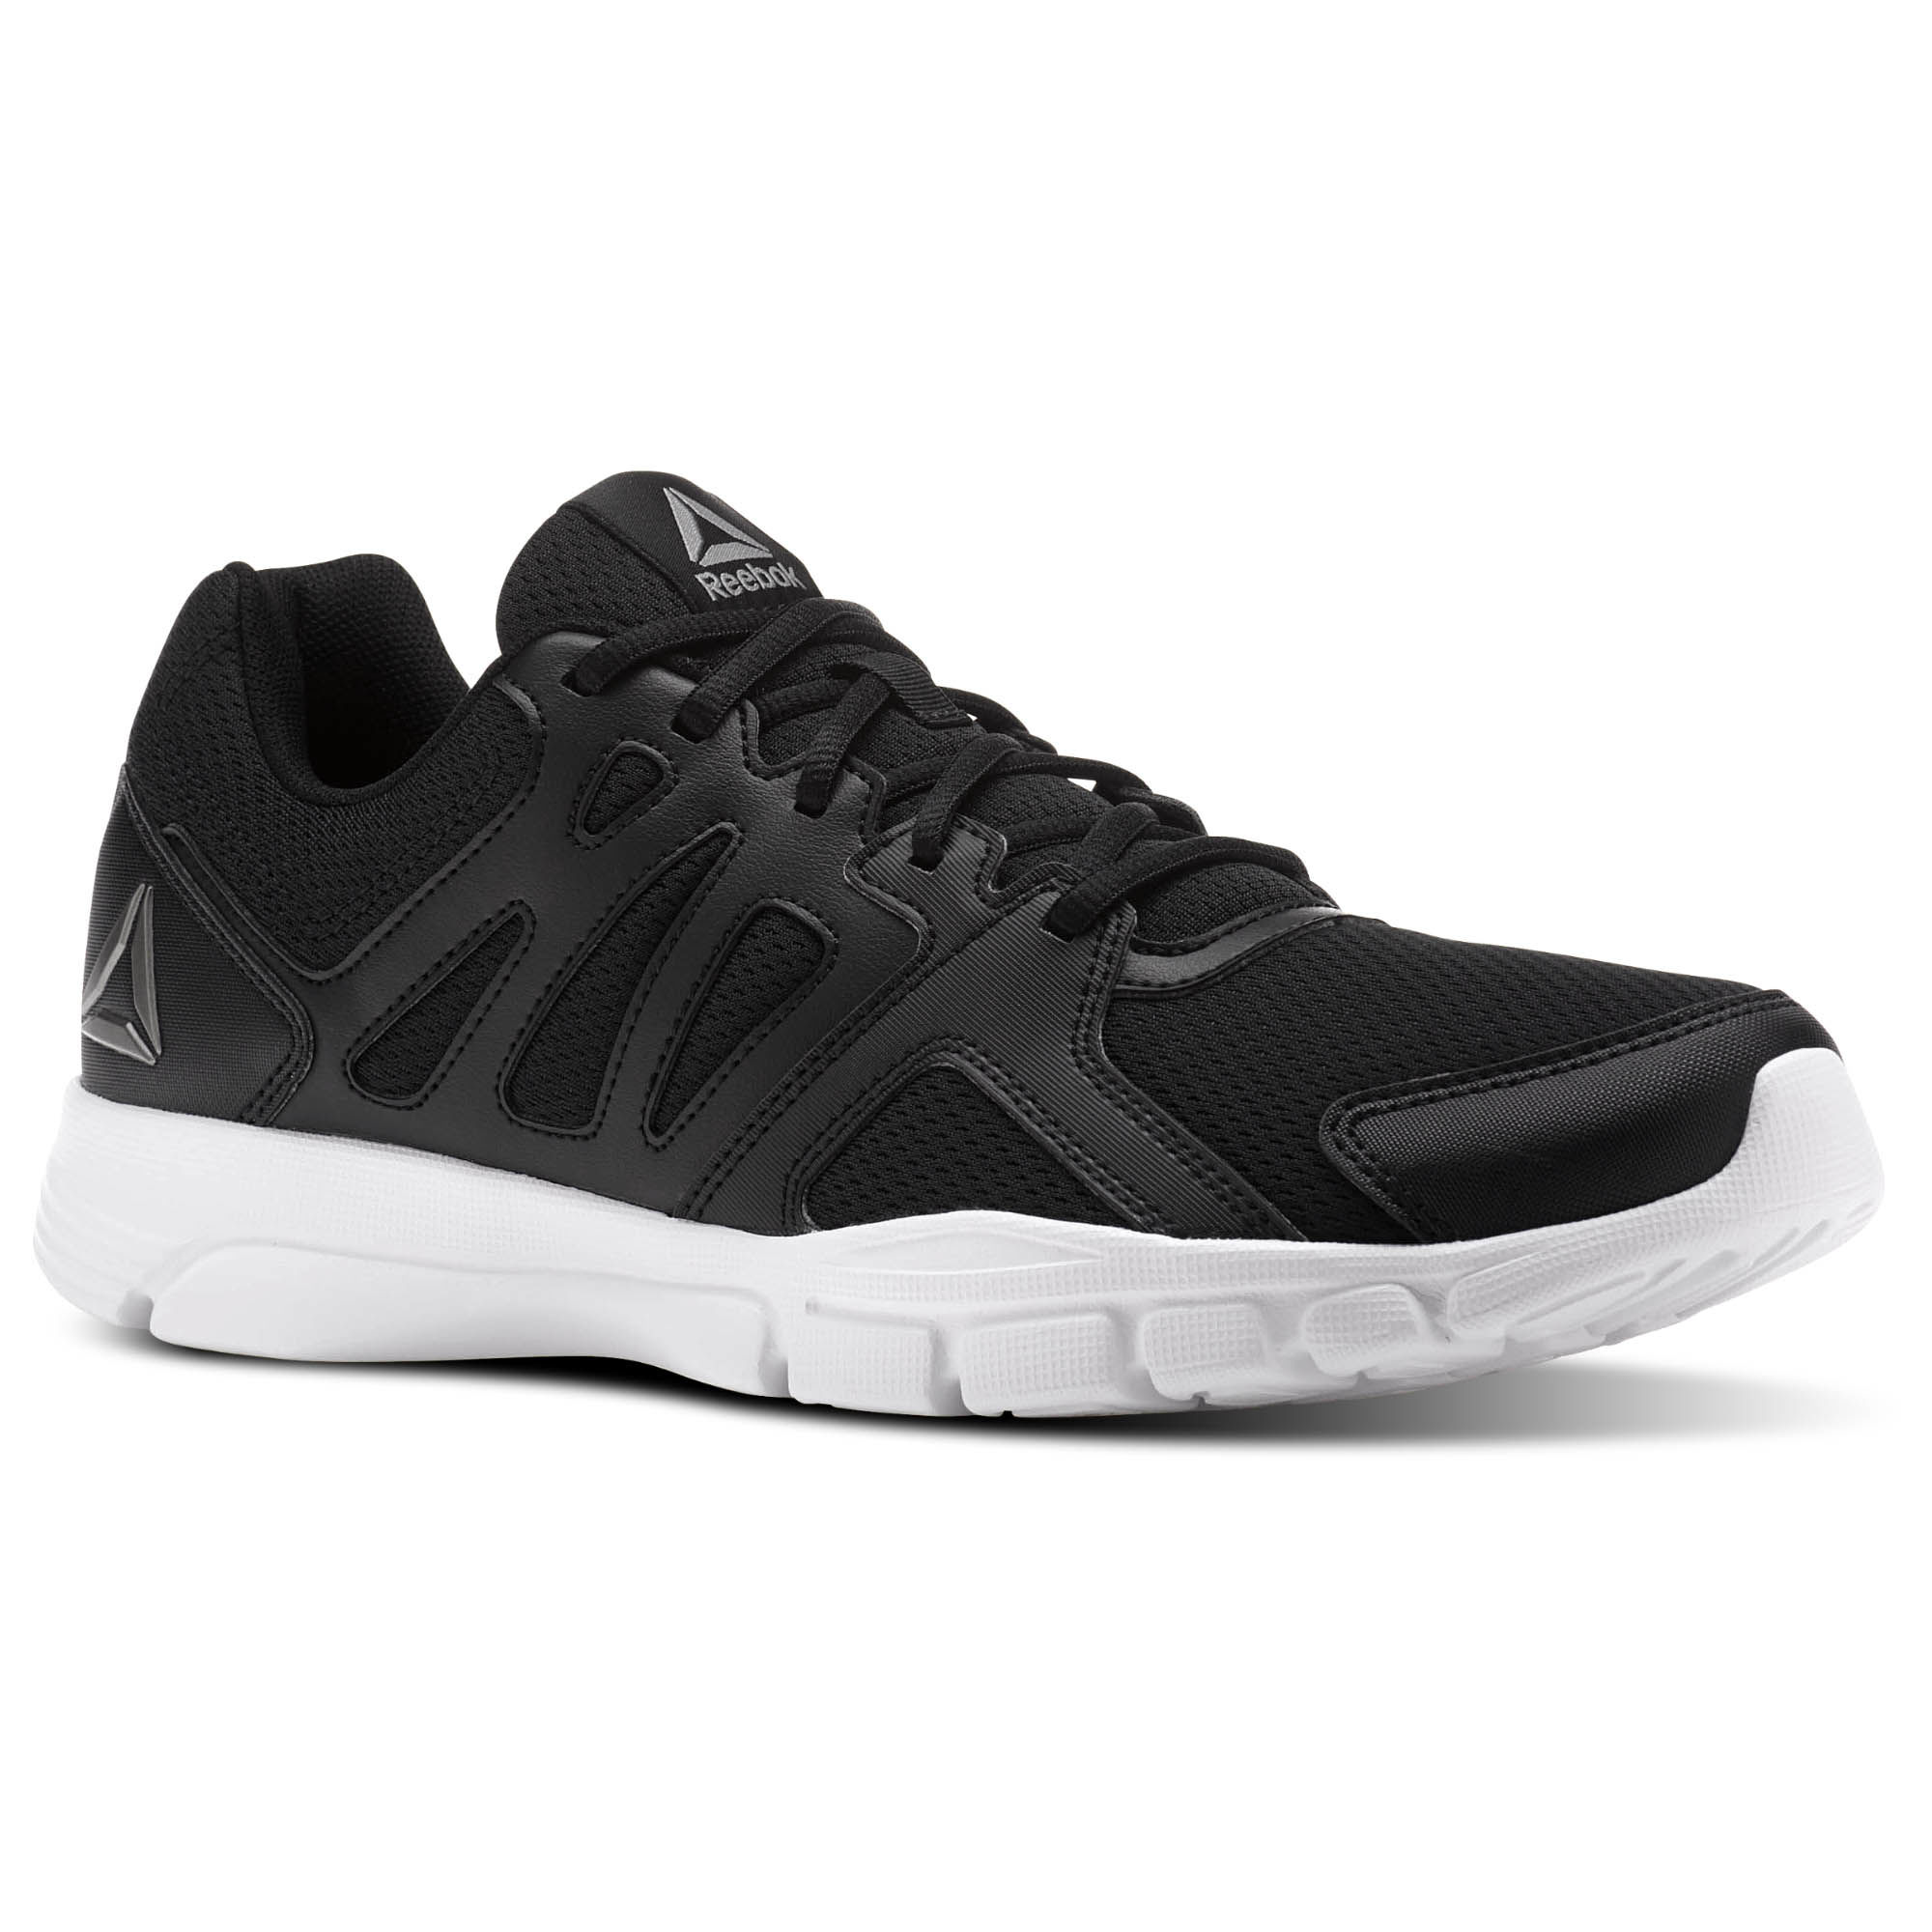 Reebok men’s Trainfusion Nine 3.0 shoes for $23, free shipping